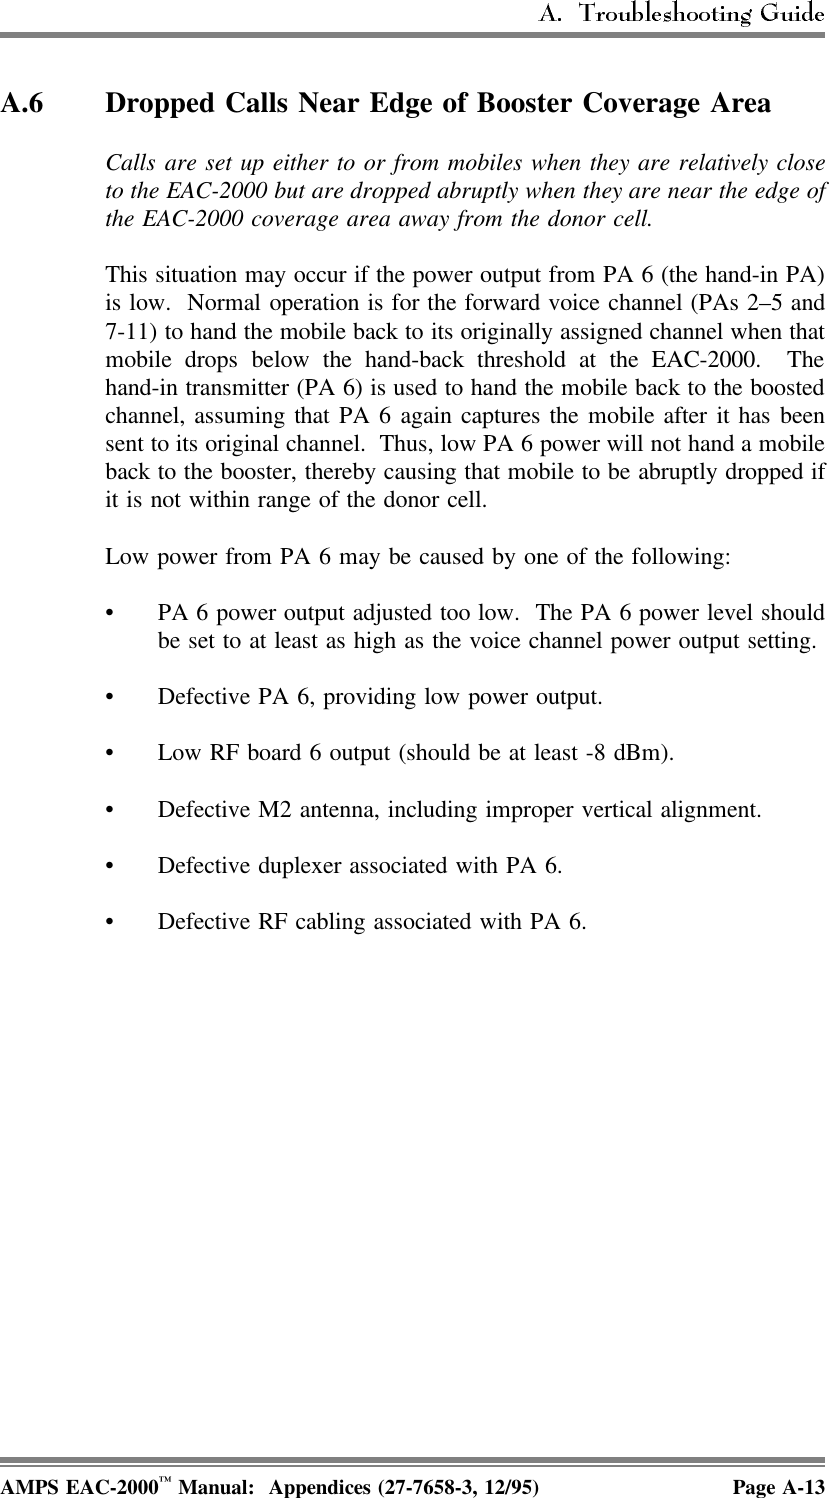 A.6 Dropped Calls Near Edge of Booster Coverage Area Calls are set up either to or from mobiles when they are relatively closeto the EAC-2000 but are dropped abruptly when they are near the edge ofthe EAC-2000 coverage area away from the donor cell.This situation may occur if the power output from PA 6 (the hand-in PA)is low.  Normal operation is for the forward voice channel (PAs 2–5 and7-11) to hand the mobile back to its originally assigned channel when thatmobile drops below the hand-back threshold at the EAC-2000.  Thehand-in transmitter (PA 6) is used to hand the mobile back to the boostedchannel, assuming that PA 6 again captures the mobile after it has beensent to its original channel.  Thus, low PA 6 power will not hand a mobileback to the booster, thereby causing that mobile to be abruptly dropped ifit is not within range of the donor cell. Low power from PA 6 may be caused by one of the following:• PA 6 power output adjusted too low.  The PA 6 power level shouldbe set to at least as high as the voice channel power output setting.• Defective PA 6, providing low power output.• Low RF board 6 output (should be at least -8 dBm). • Defective M2 antenna, including improper vertical alignment.• Defective duplexer associated with PA 6.• Defective RF cabling associated with PA 6. AMPS EAC-2000™ Manual:  Appendices (27-7658-3, 12/95) Page A-13